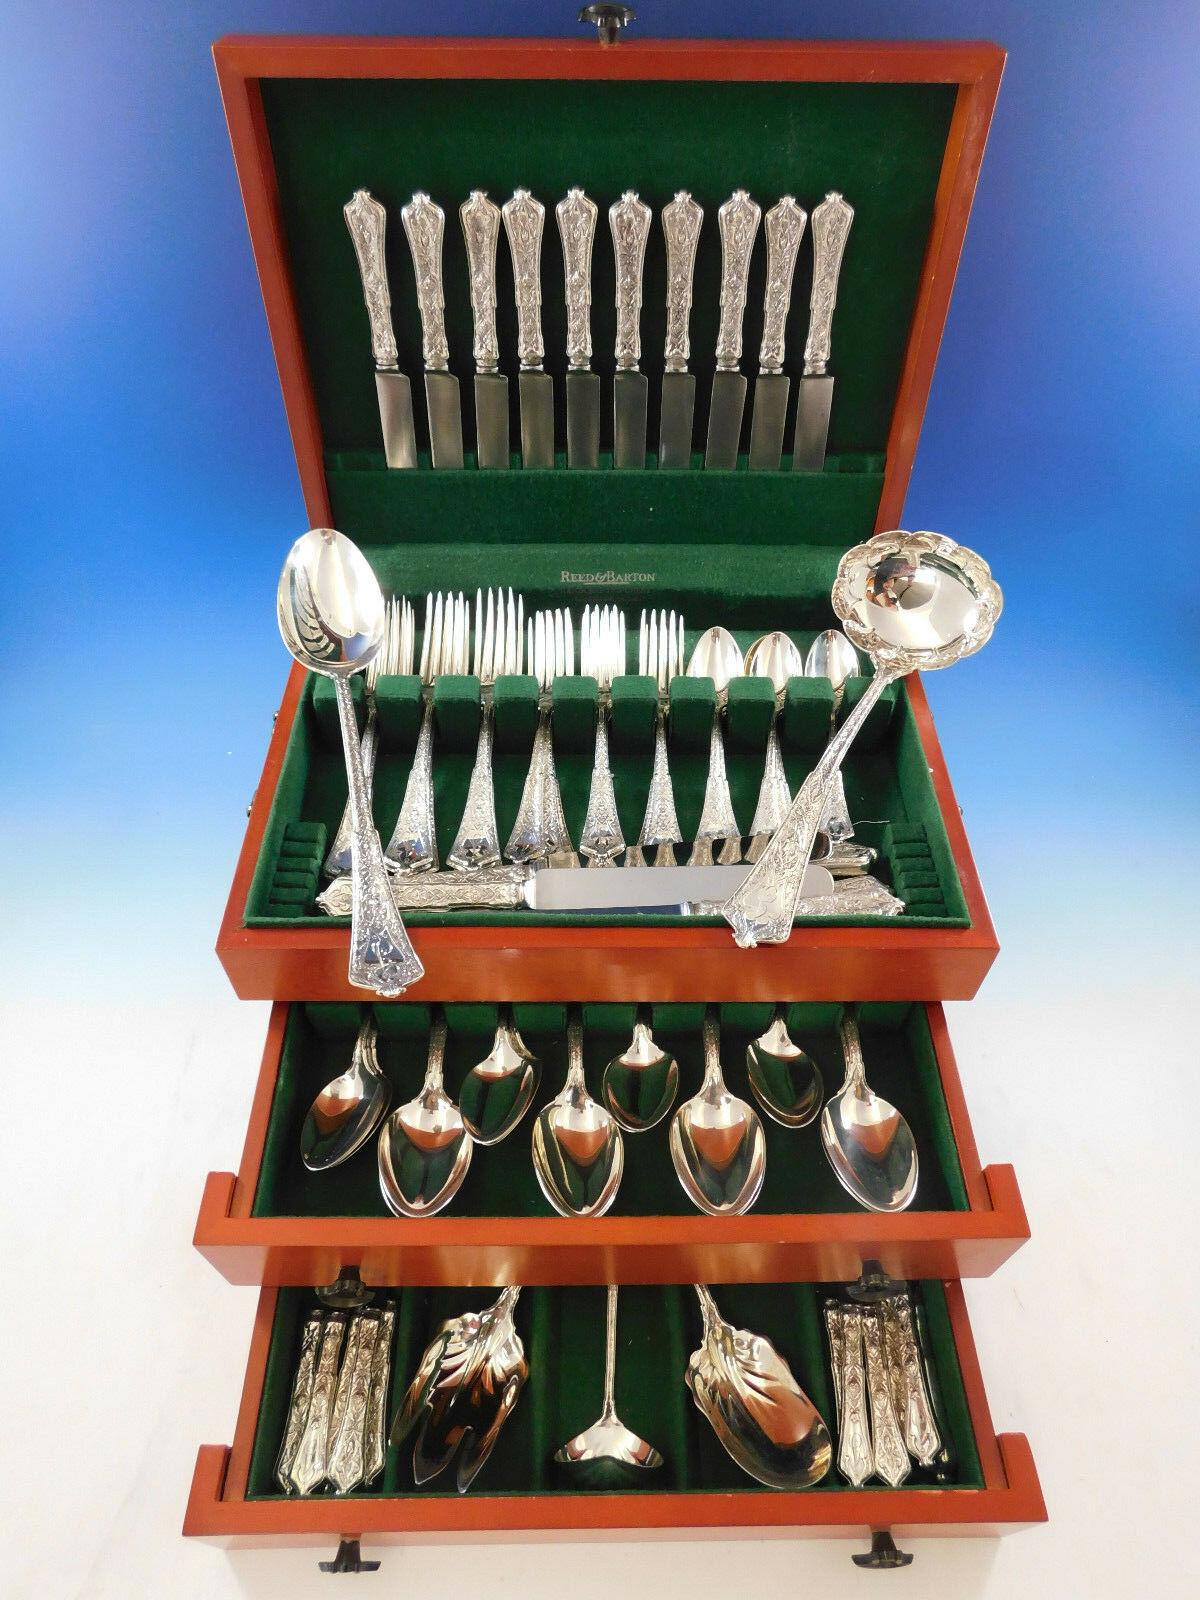 Exquisite dinner size Persian by Tiffany & Co. sterling silver flatware set - 85 pieces. This set includes

10 dinner size knives, 10 1/4